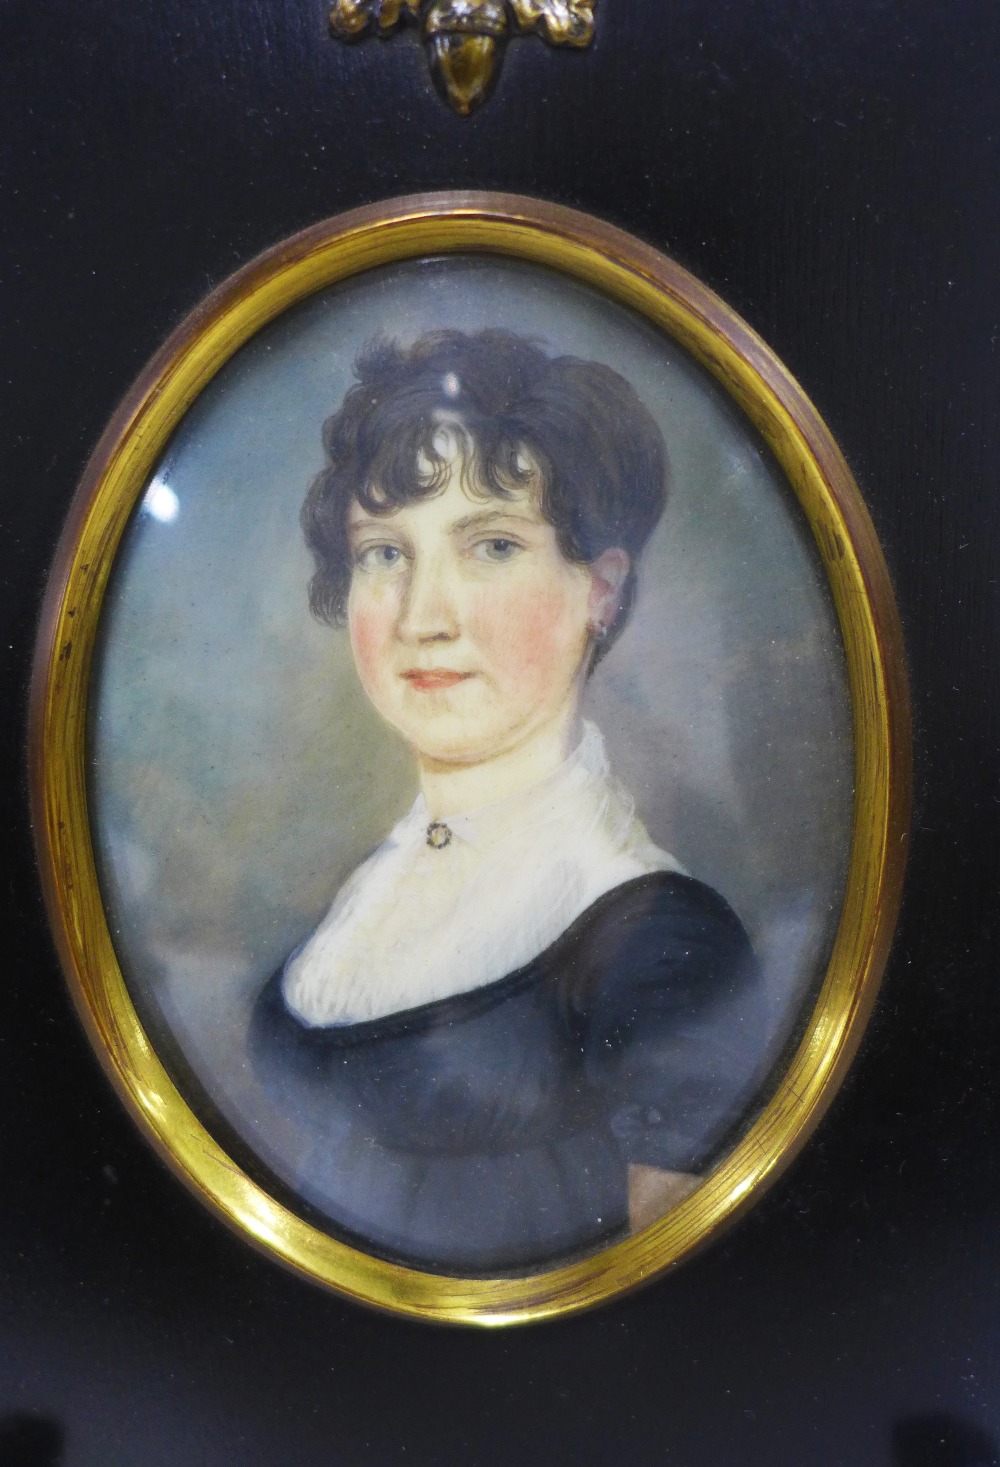 Four 19th century portrait miniatures, painted on ivory, to include Alexander Cunningham by - Image 4 of 5